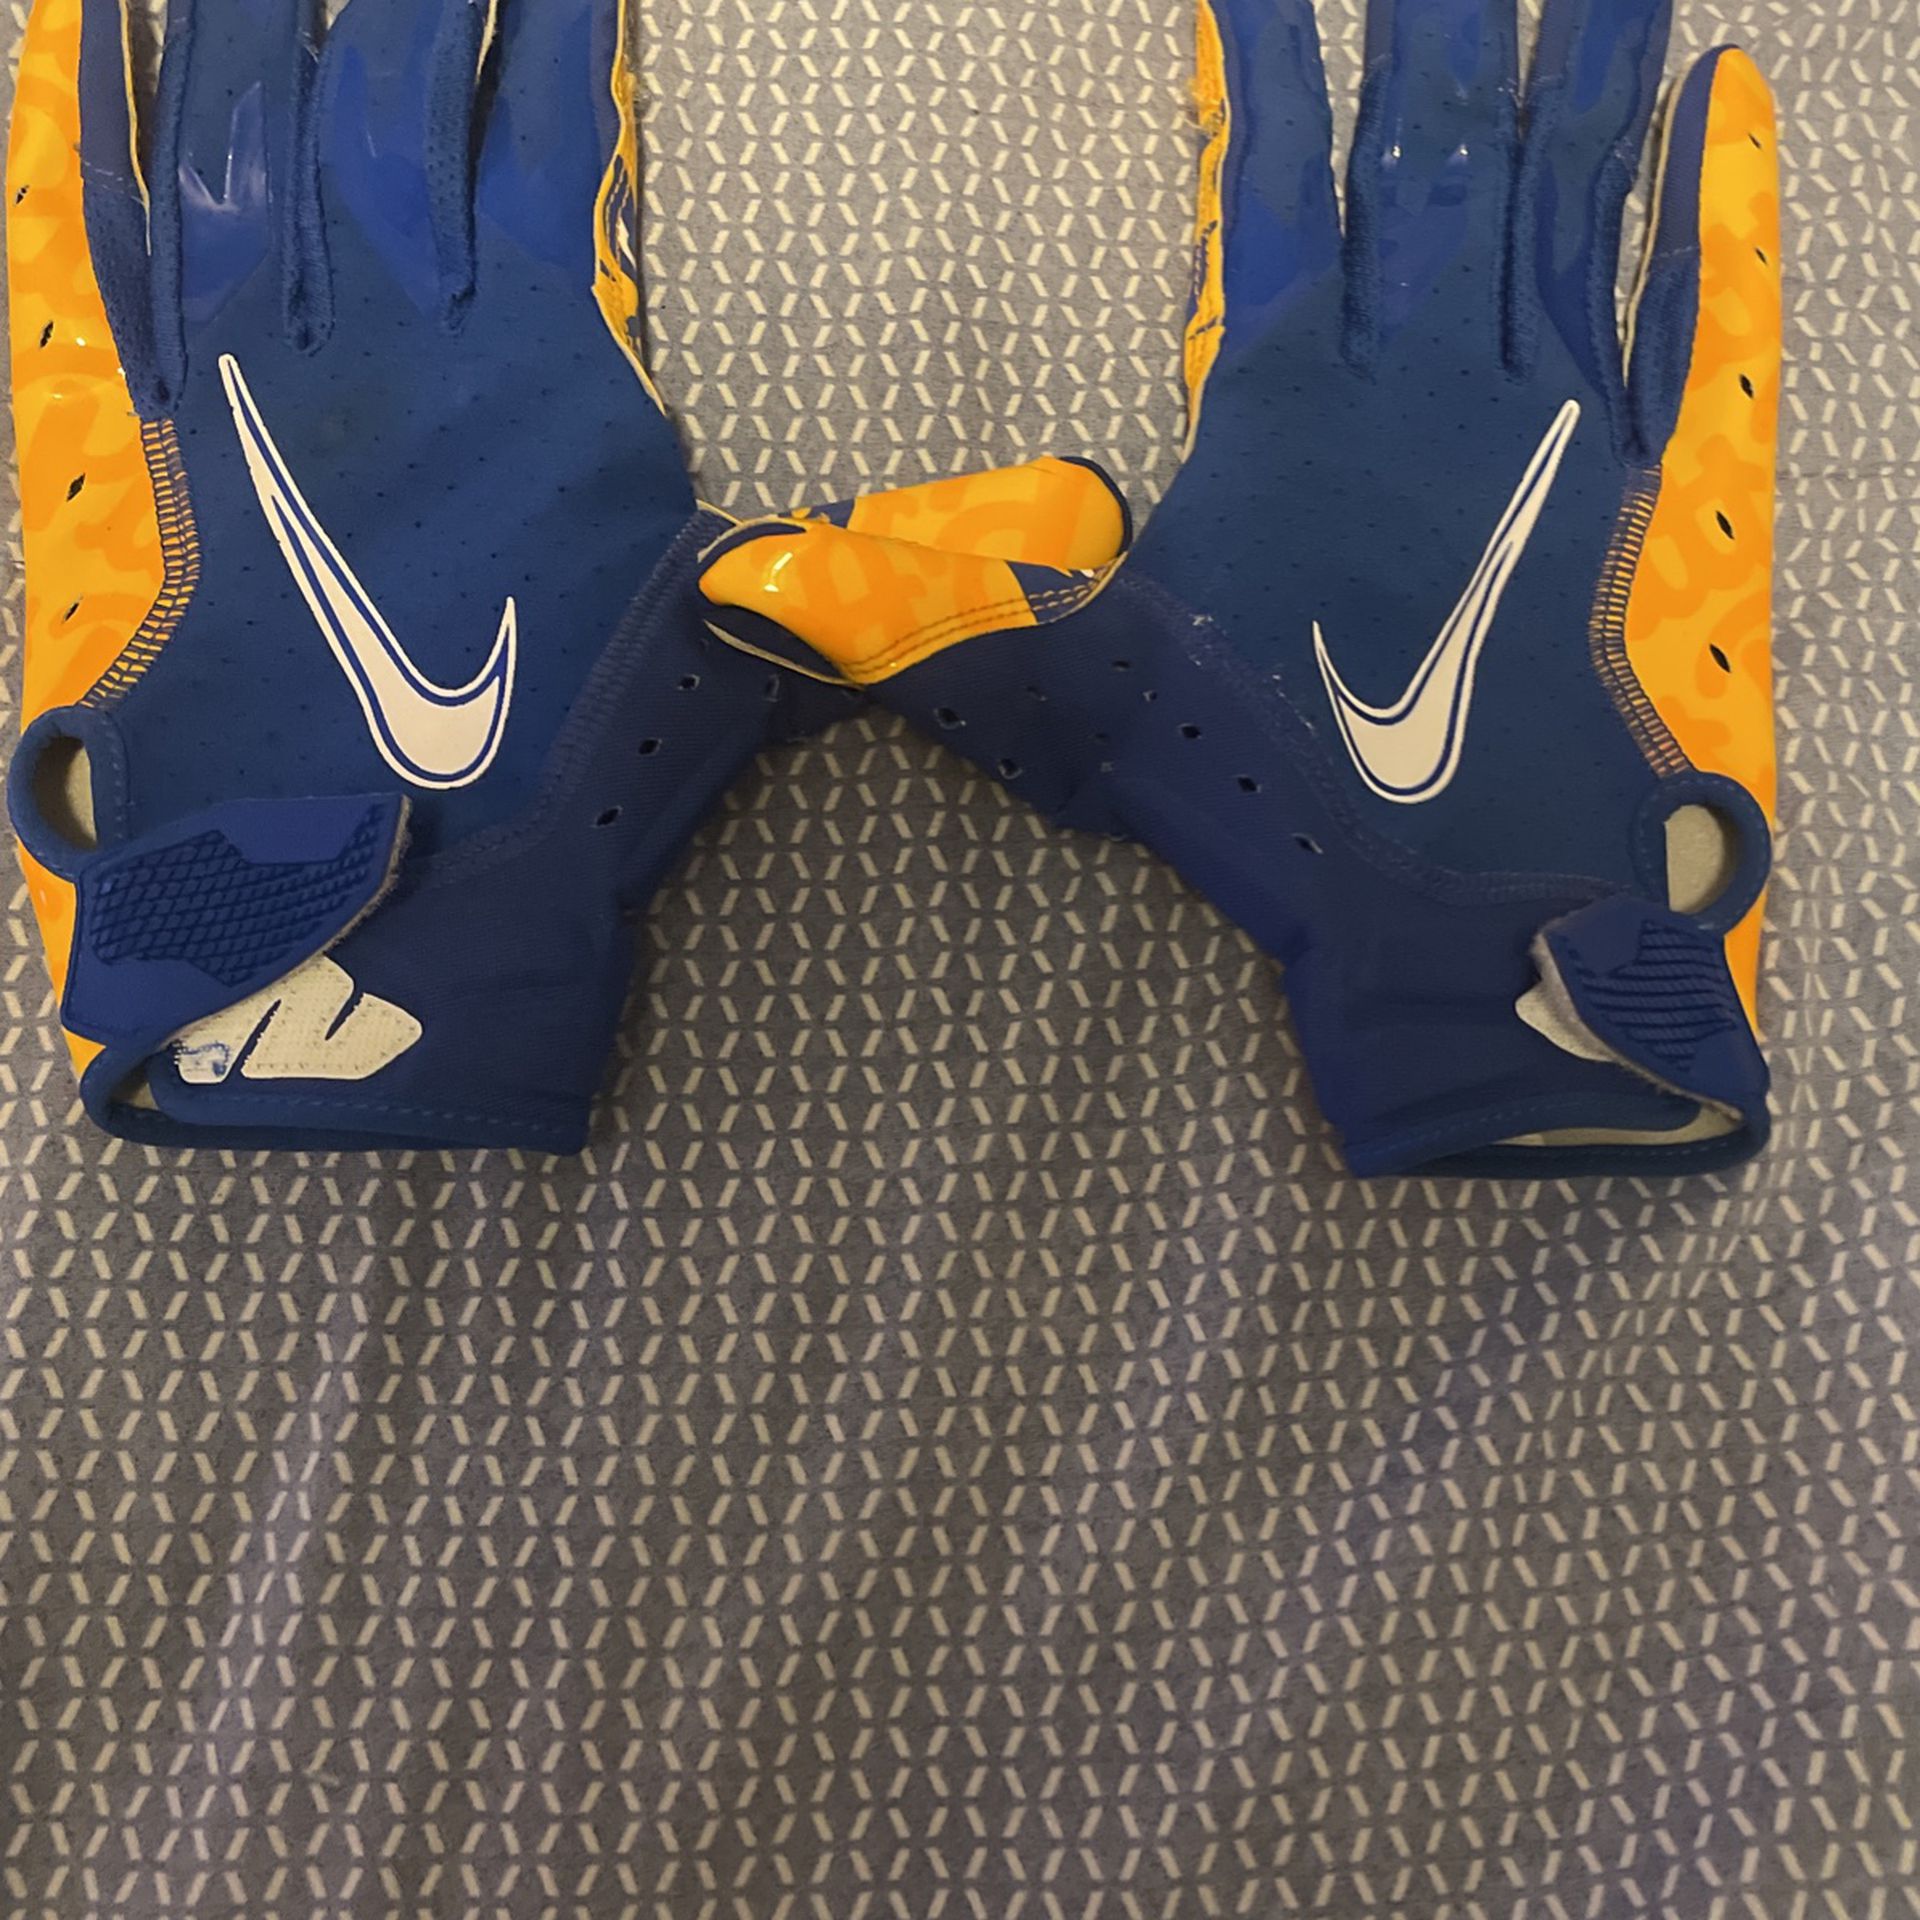 Gorilla Grip Gloves (Brand New!) for Sale in Pittsburgh, PA - OfferUp